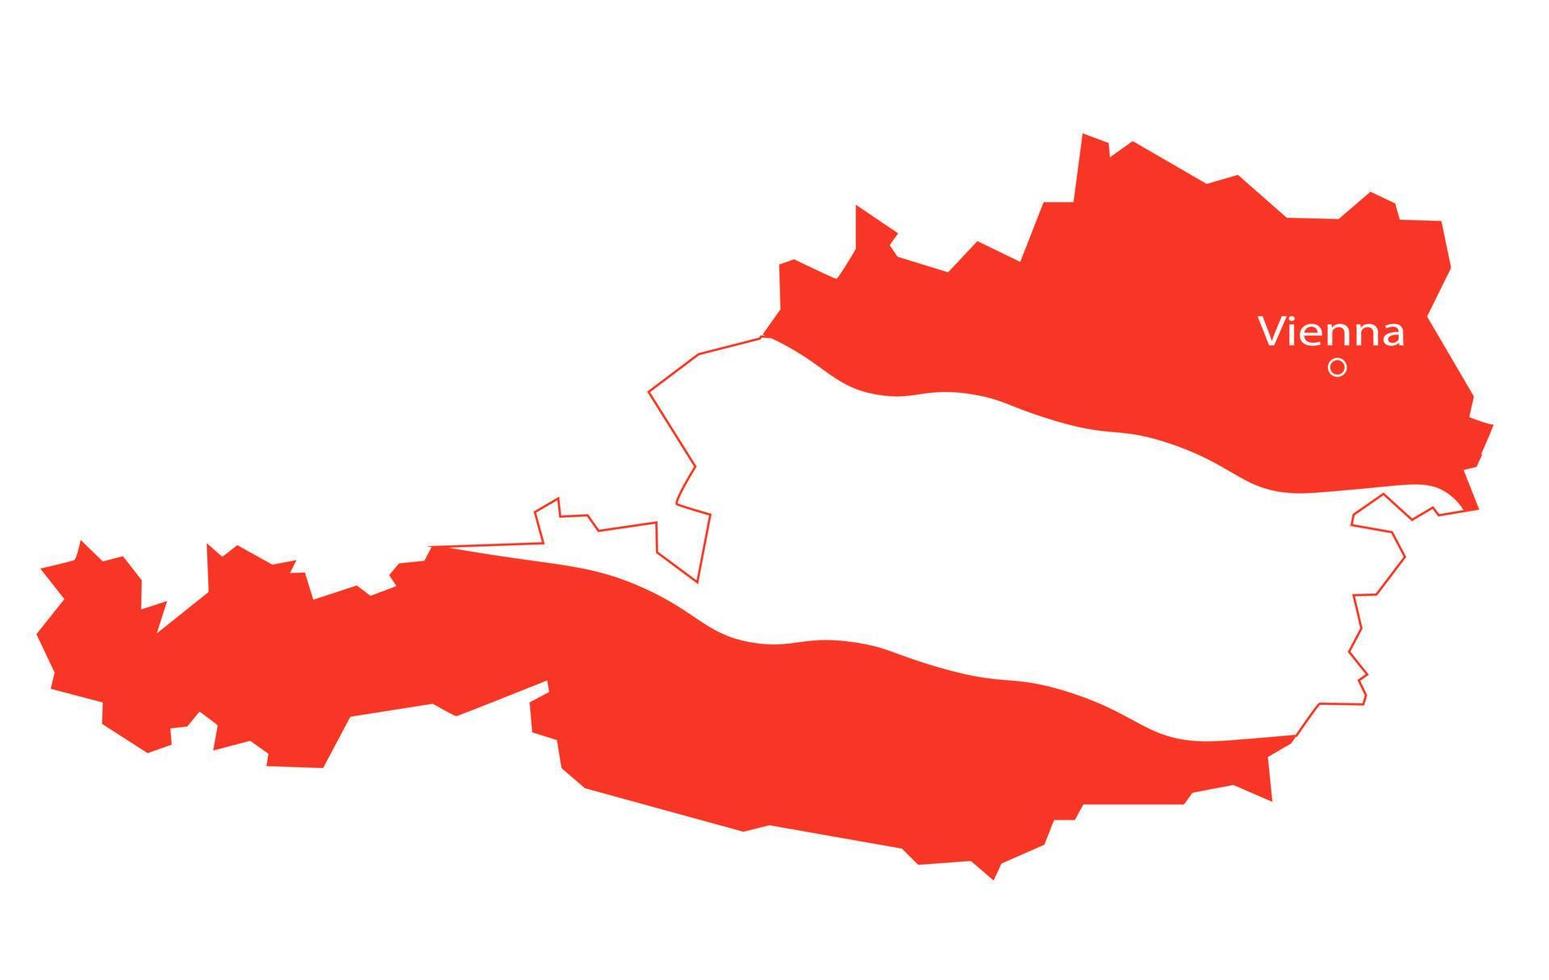 Austria map vector stock illustration. The capital city is Vienna. The flag of Austria is red and white. Isolated on a white background.